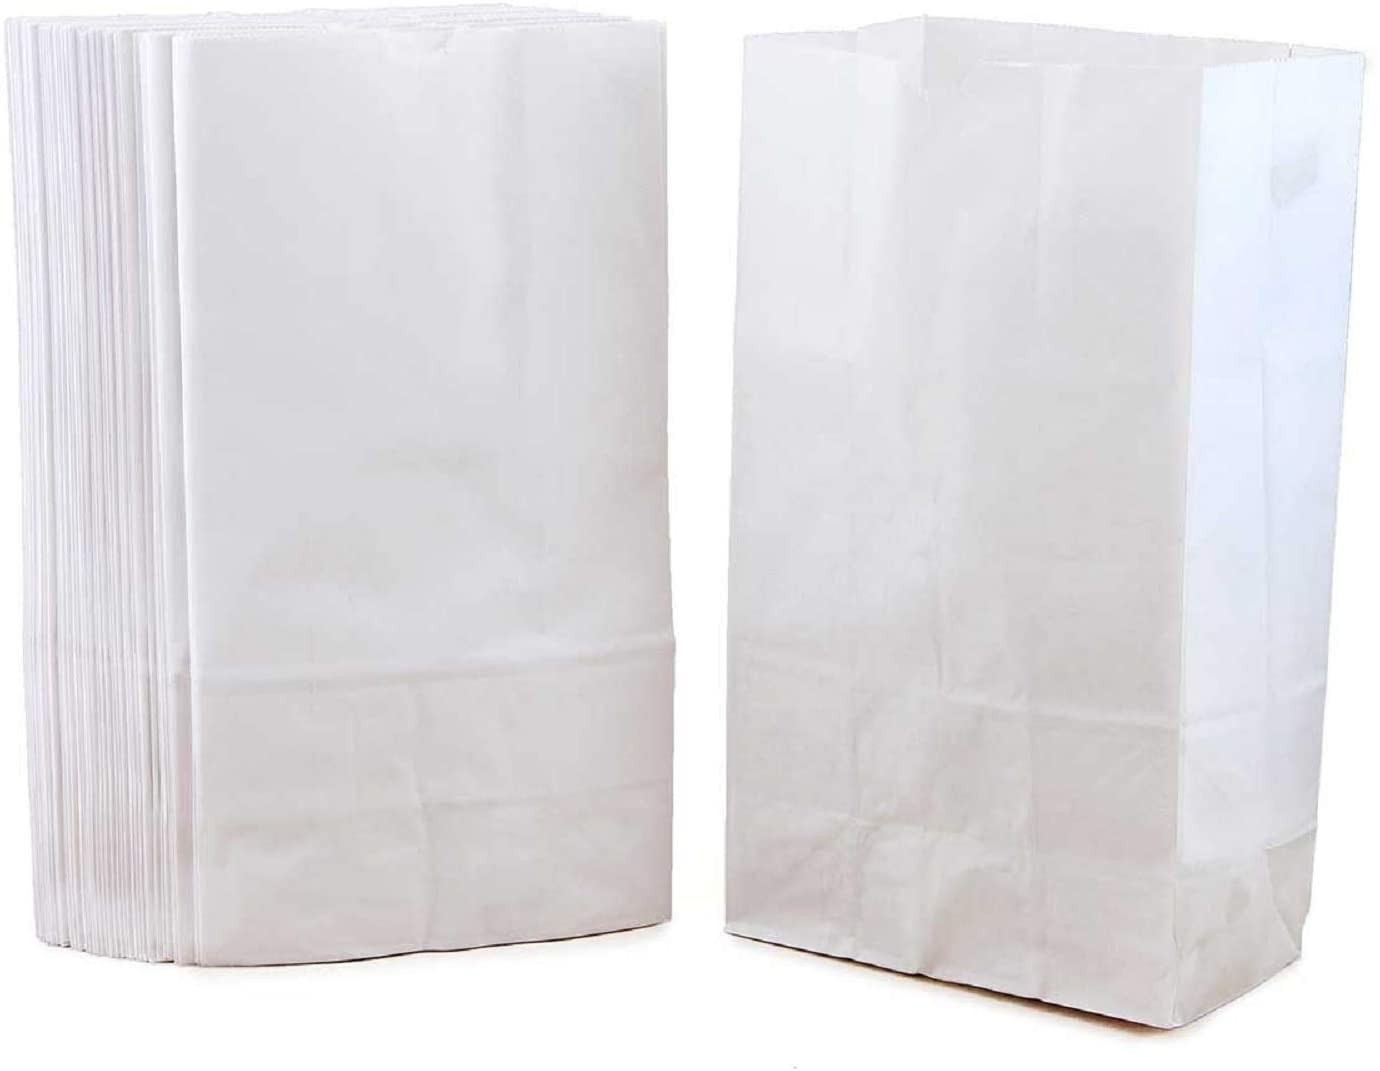 Gusseted Paper Bags White